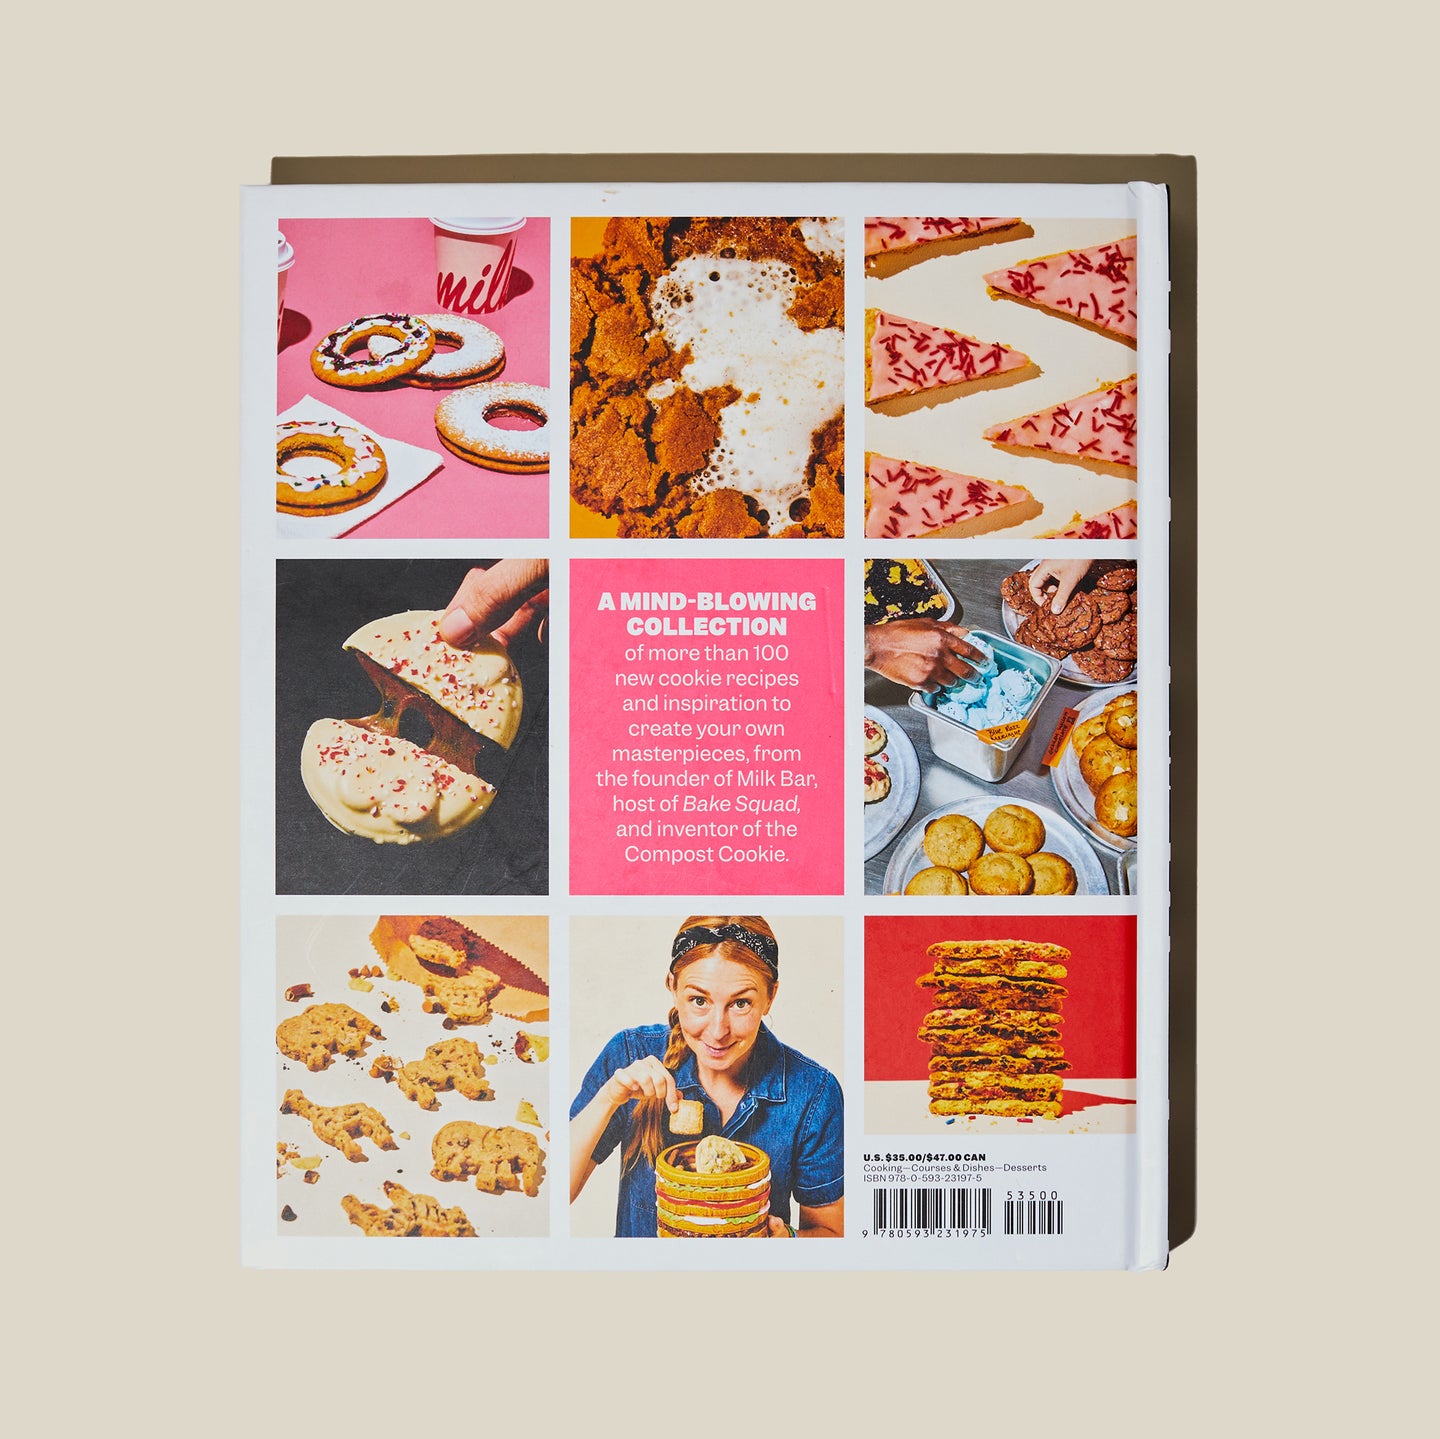 Back cover of All About Cookies cookbook.